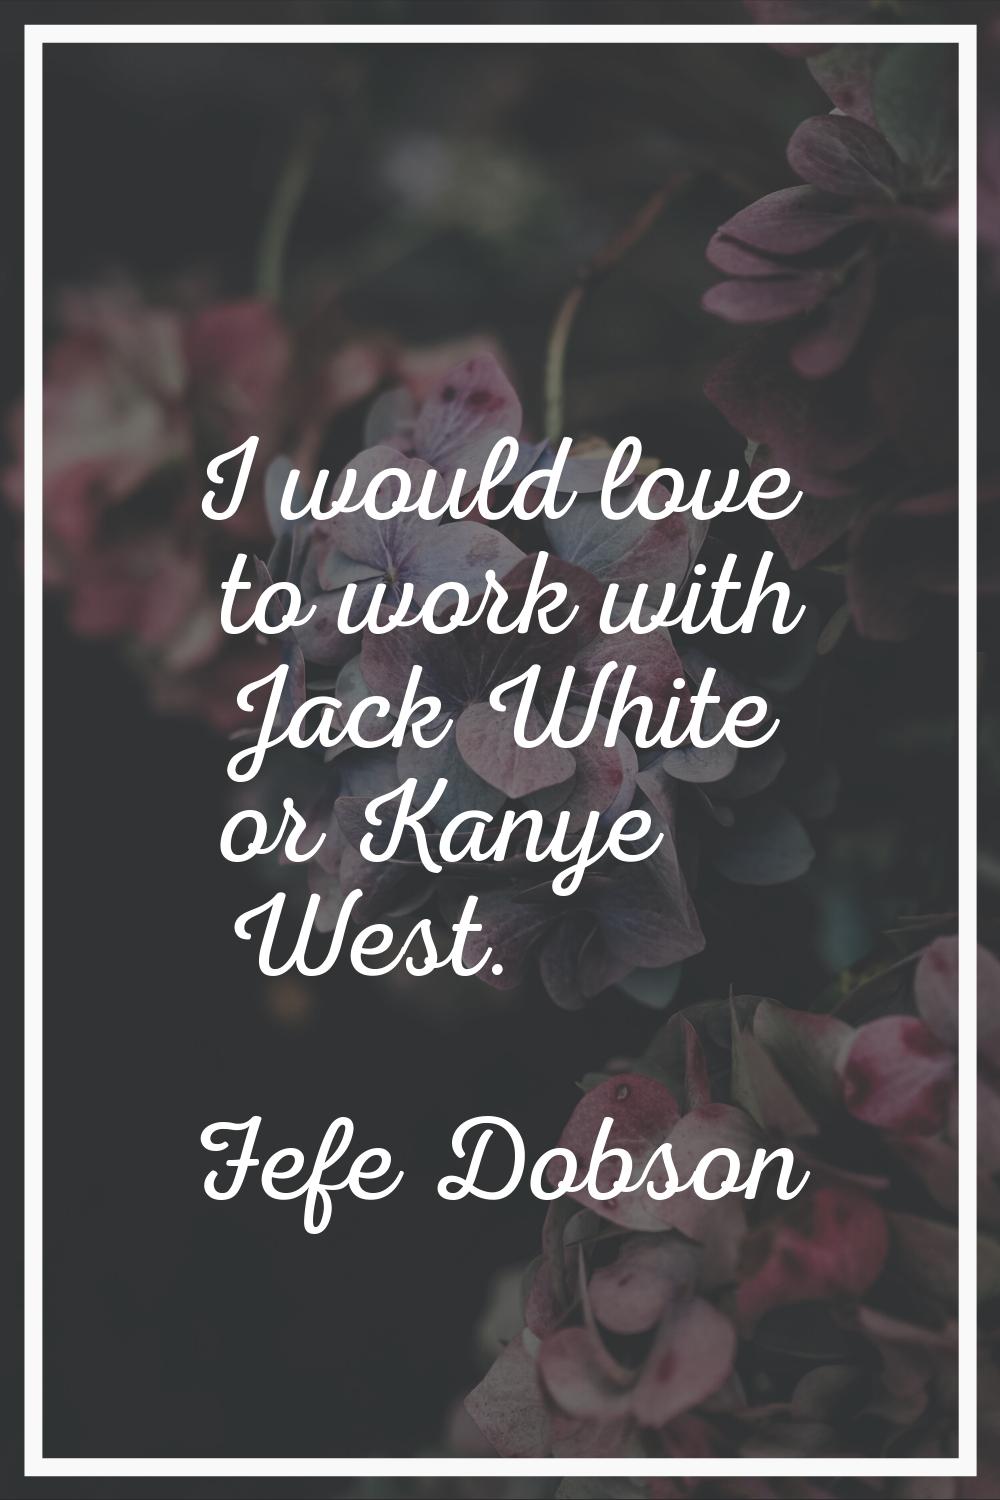 I would love to work with Jack White or Kanye West.